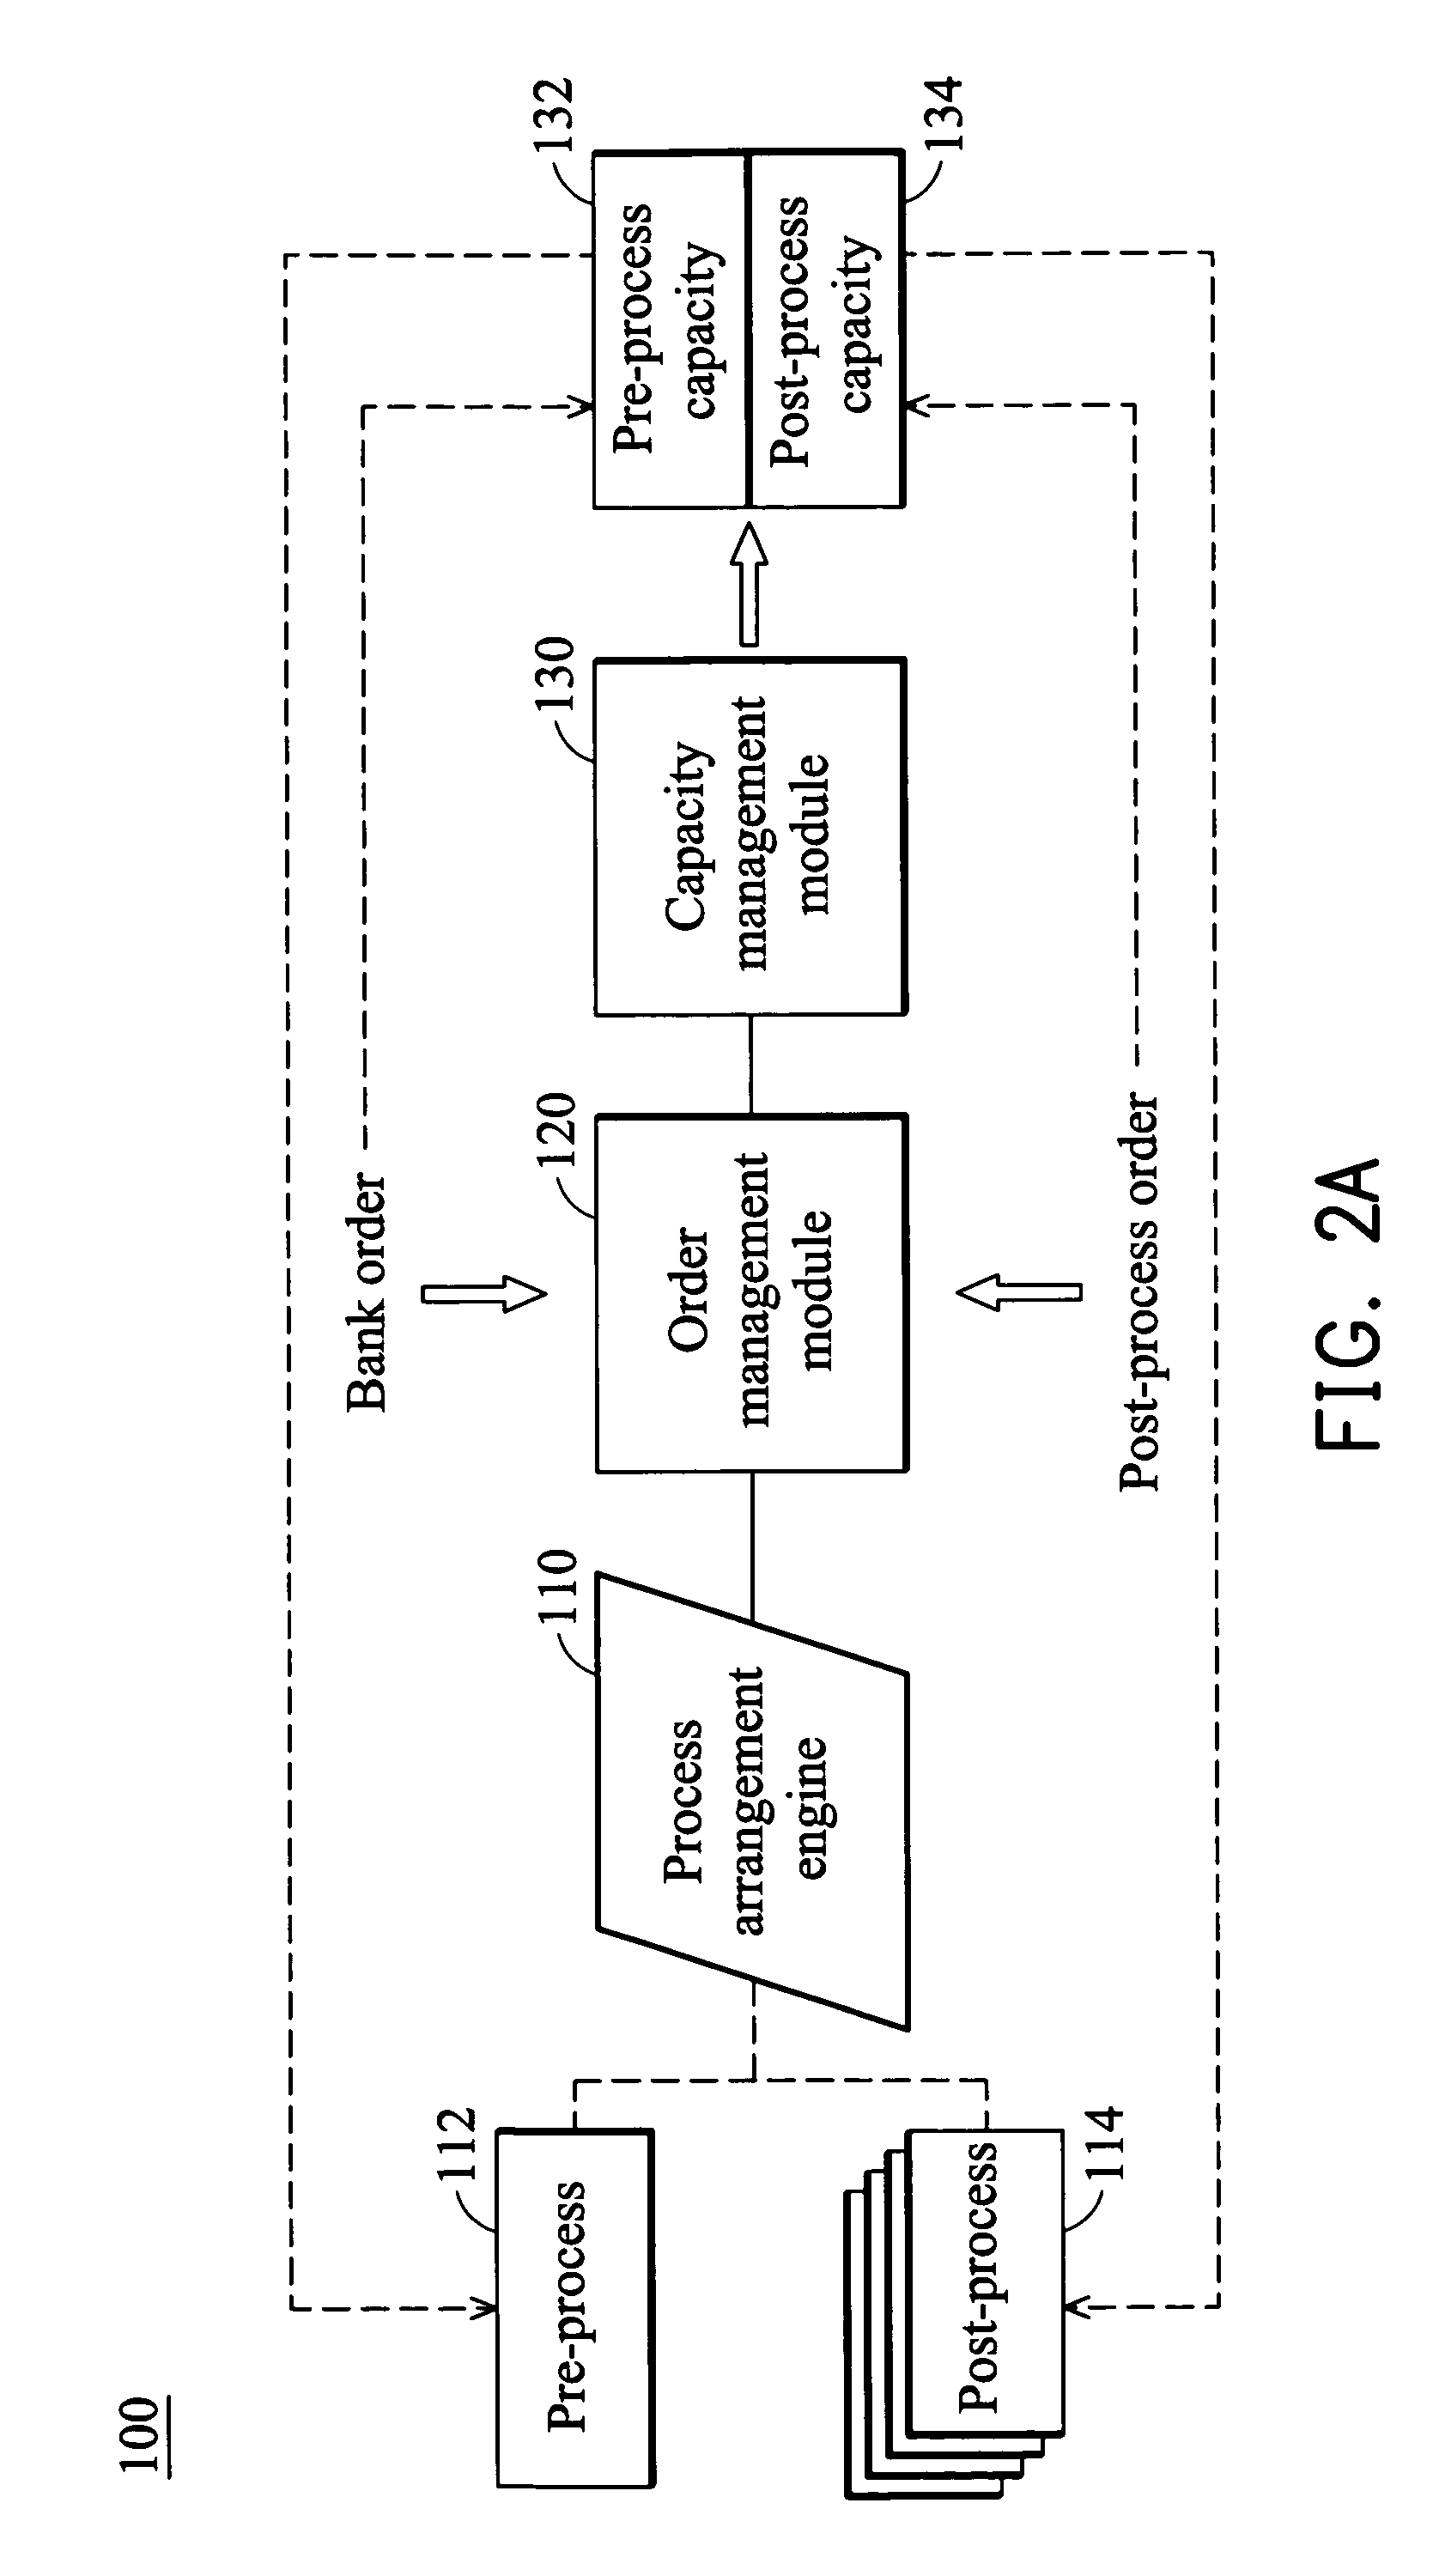 System and method of reserving capacity for a pre-process order